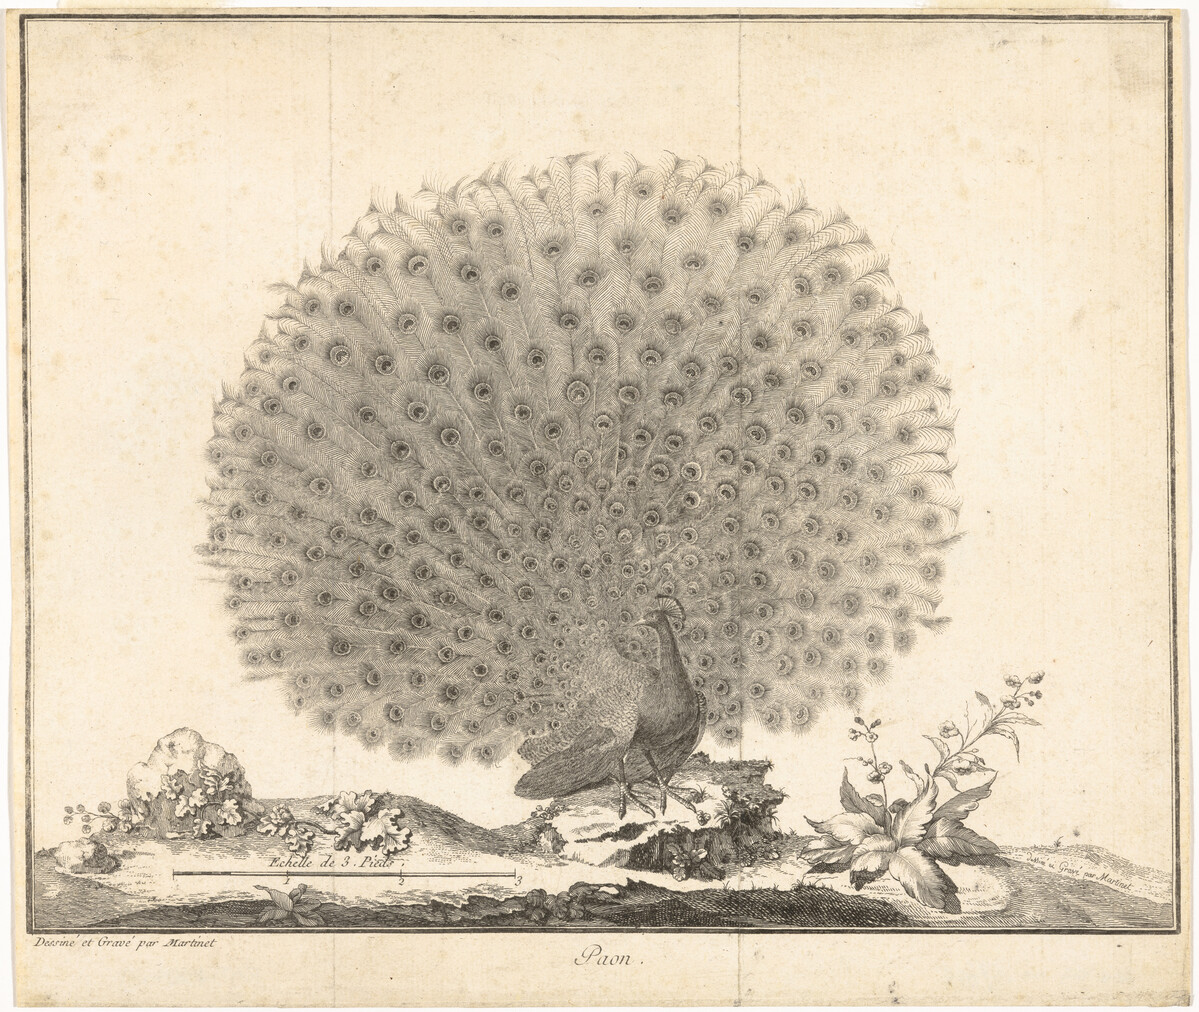 Print showing a peacock with plumed feathers.